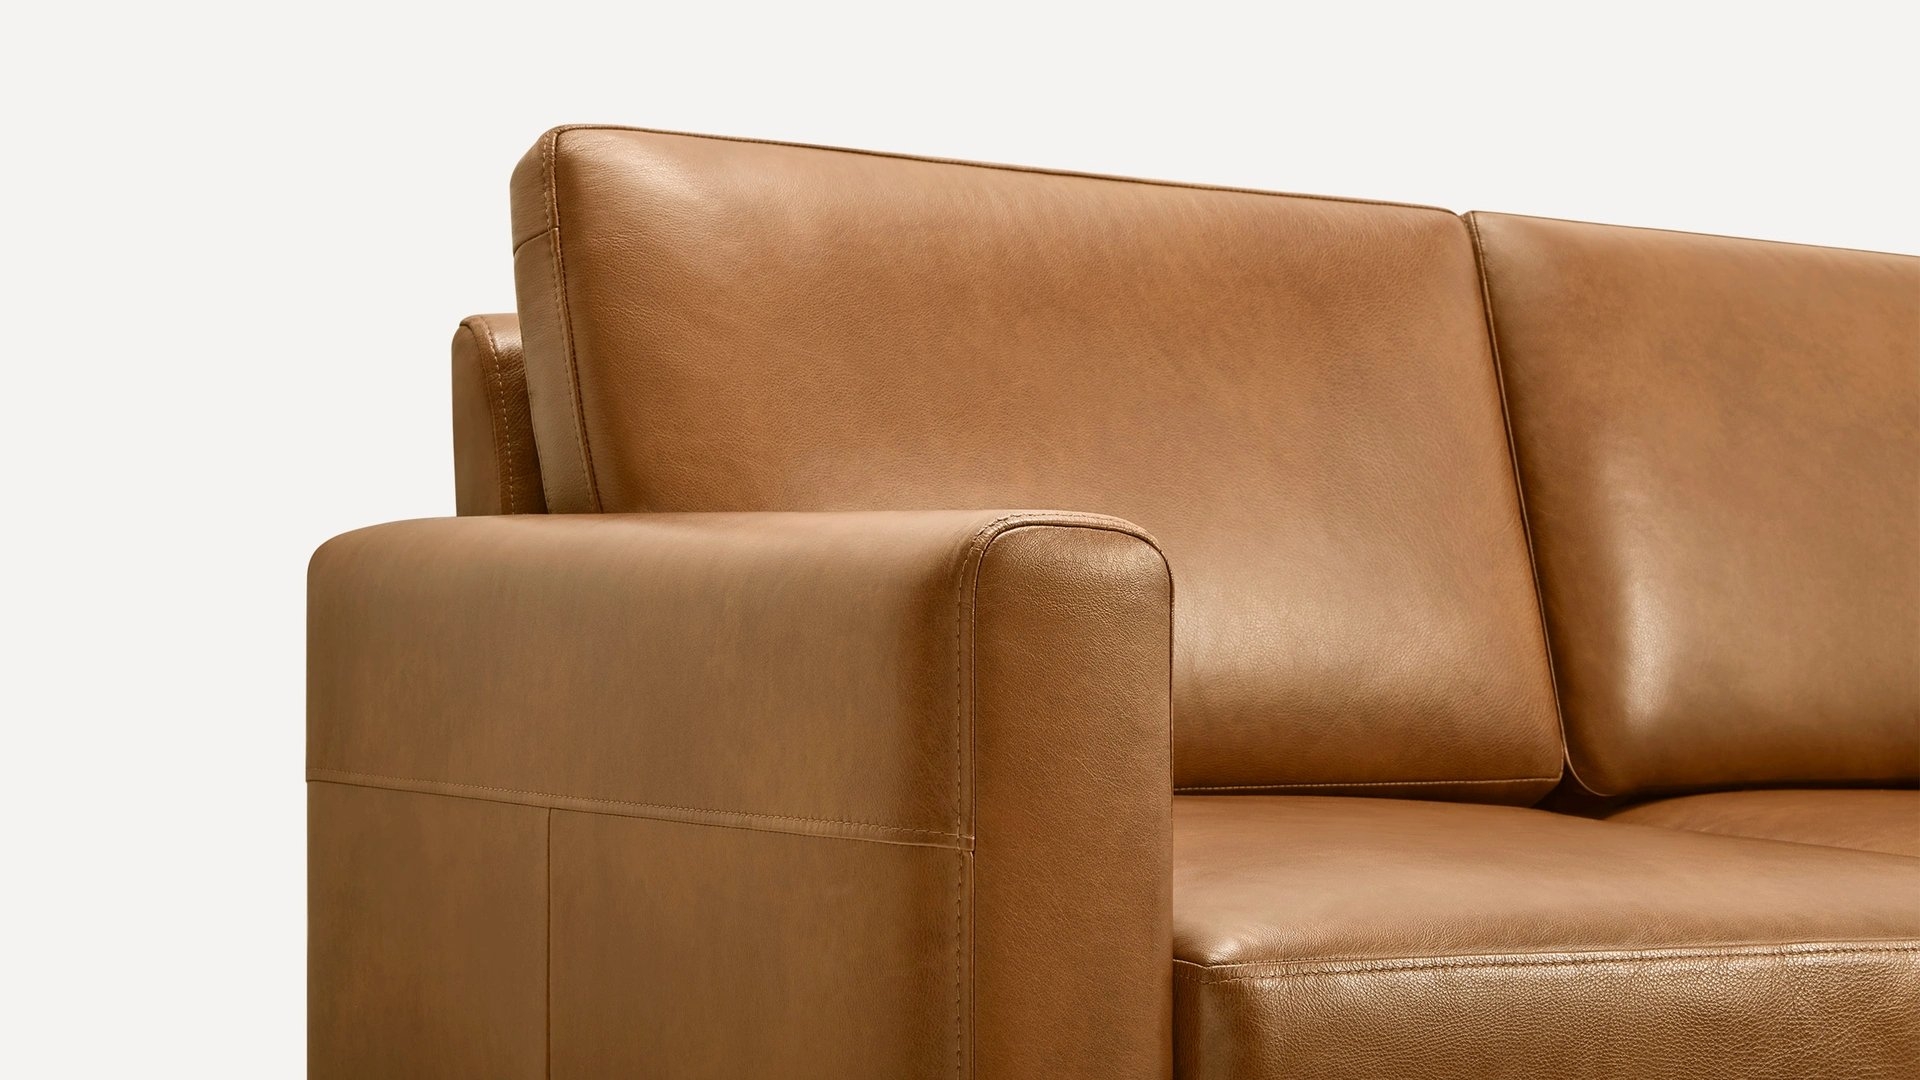 Nomad Leather Club Chair in Camel, Brass Legs - Image 1